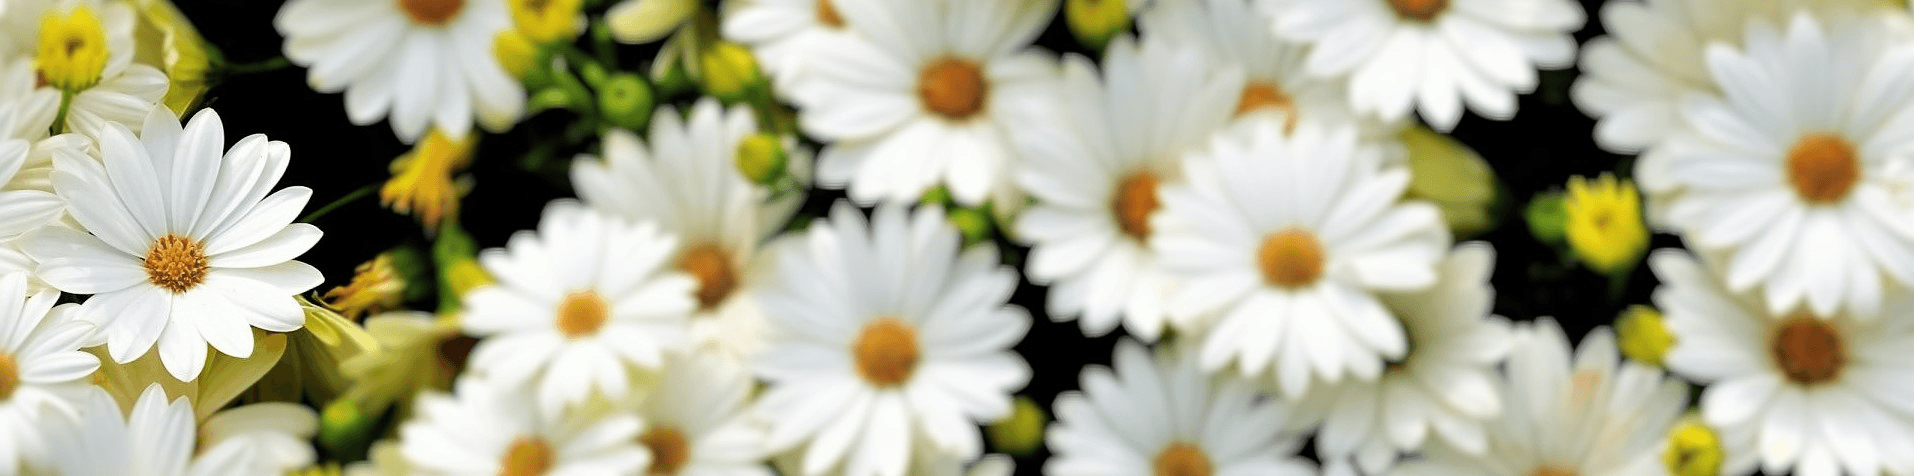 banner picture - close-up of daisies - one flower in focus